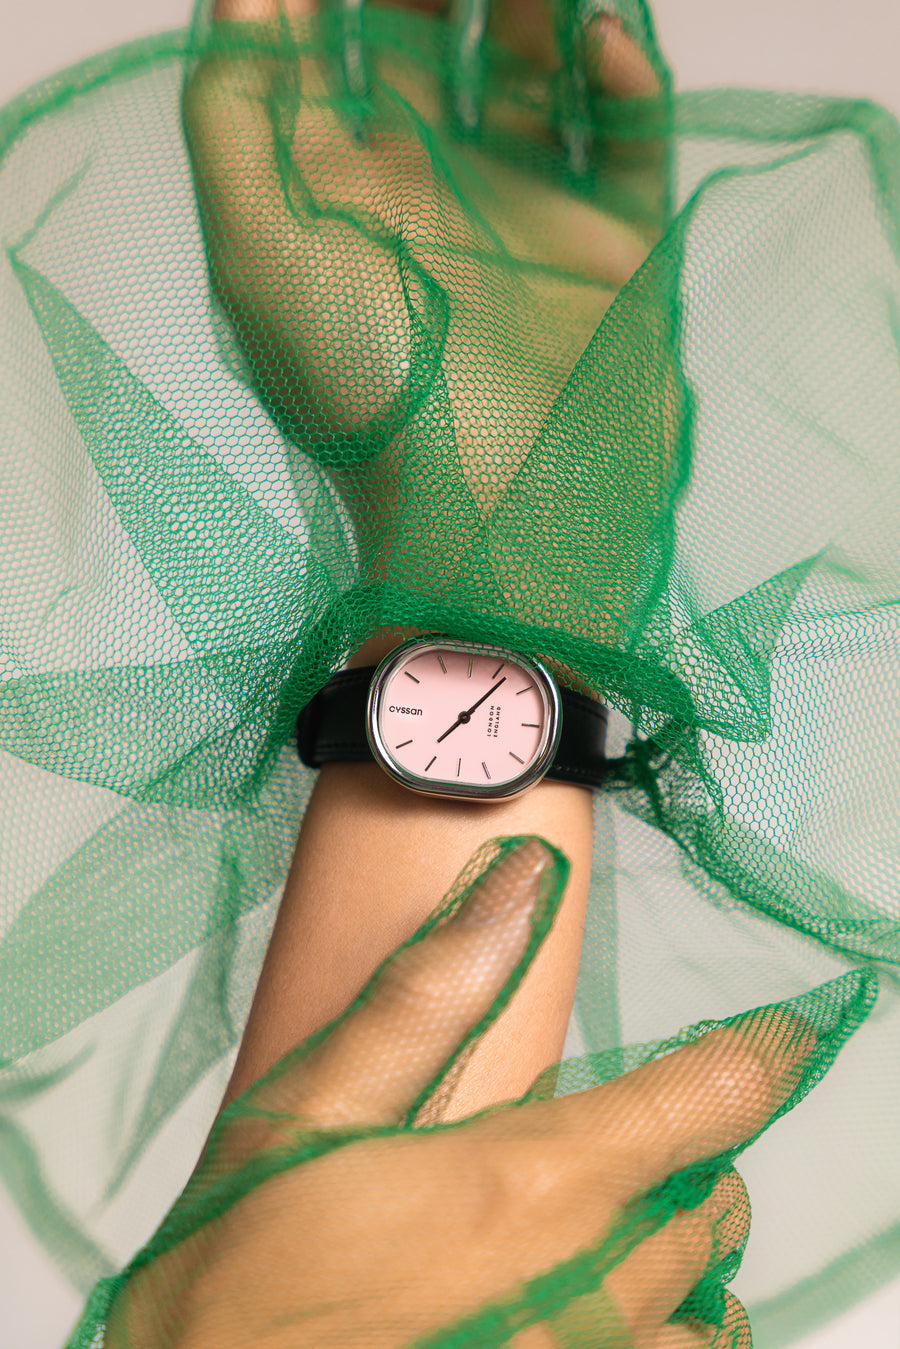 a close-up of a woman's hand and wrist. She's wearing a watch with a pink dial, silver case and black strap, and green tulle gloves